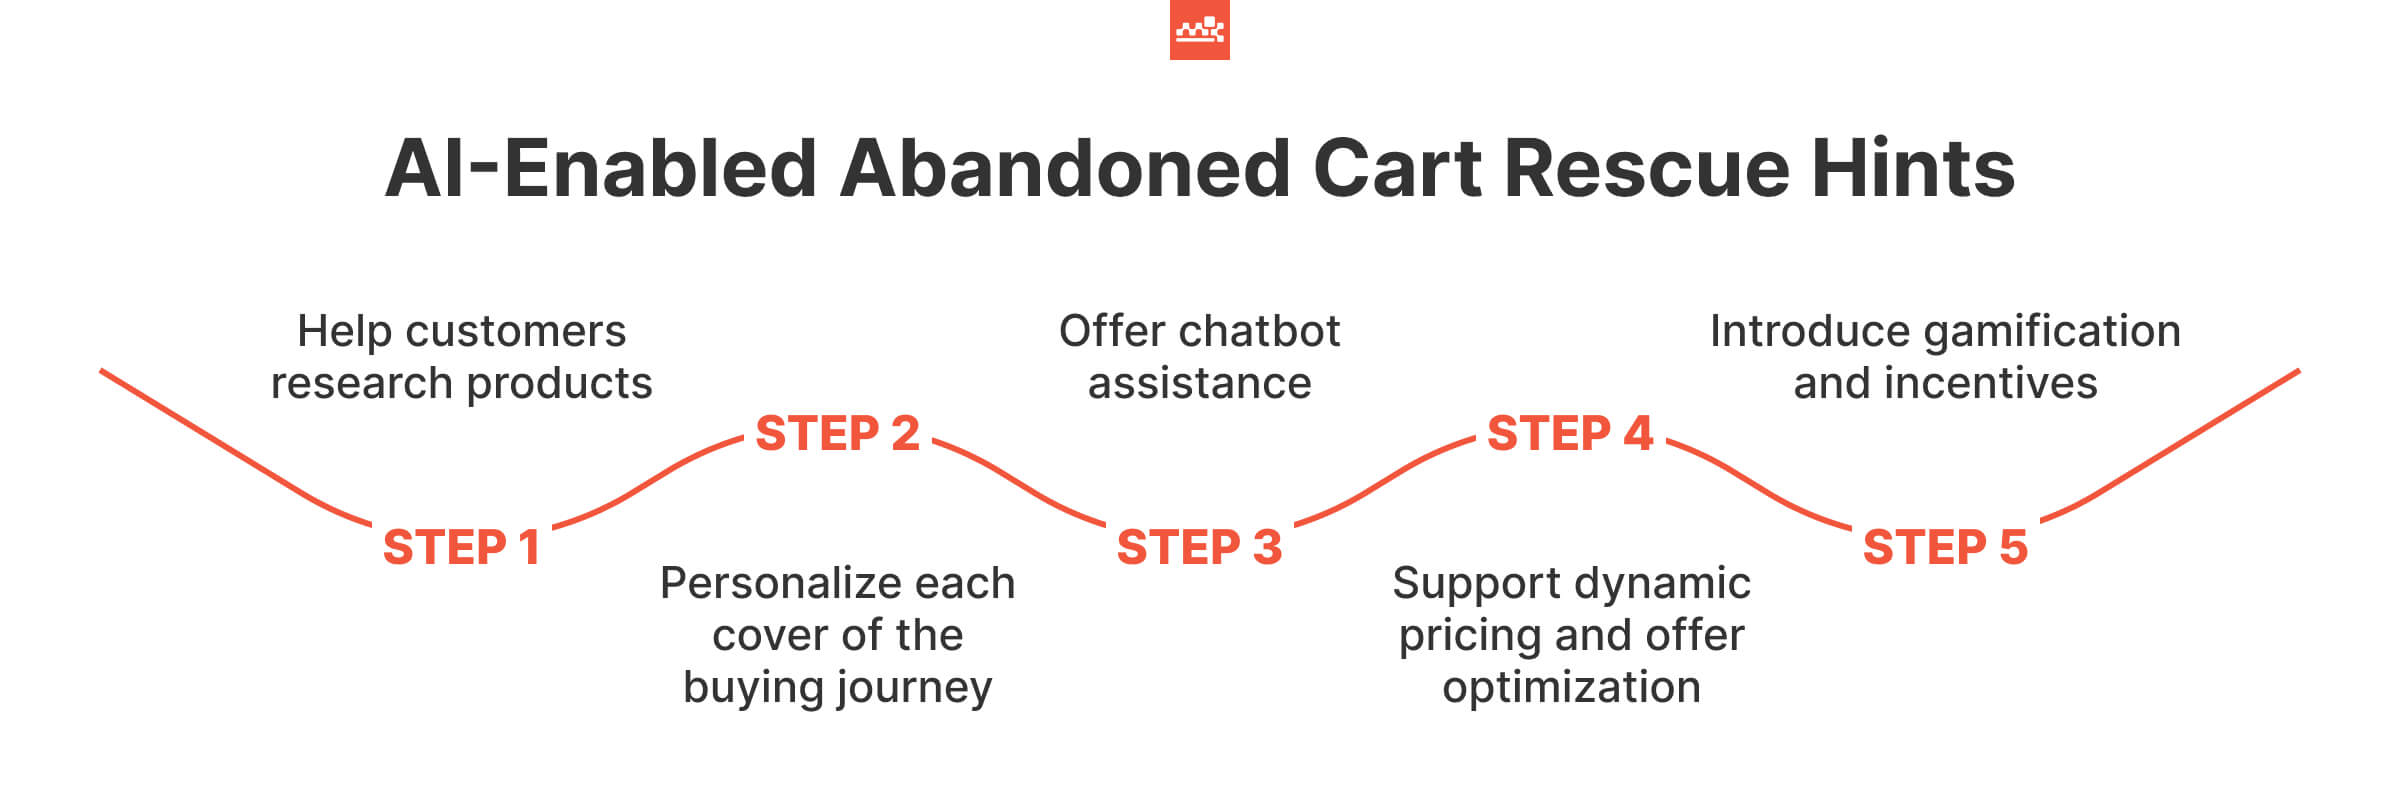 AI-Enabled Abandoned Cart Rescue Hints